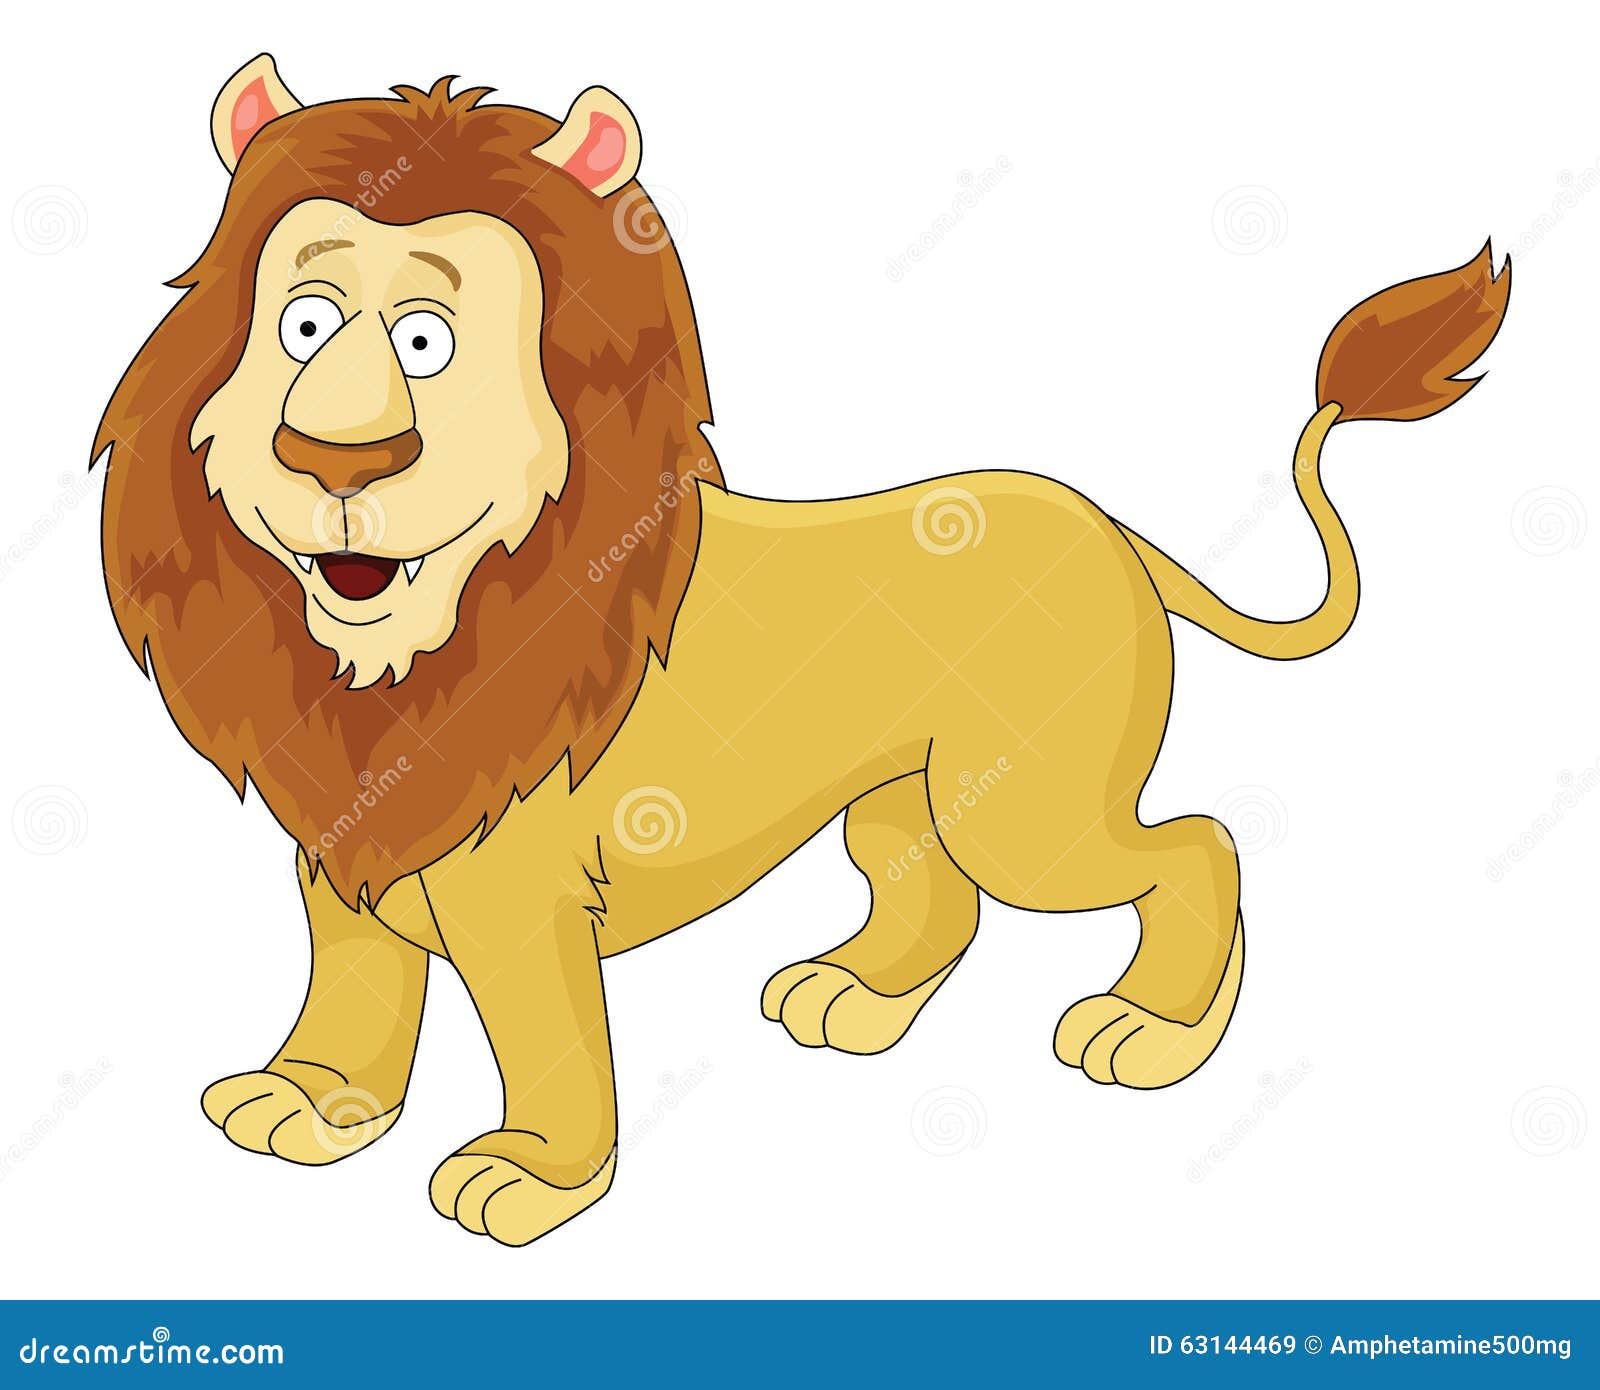 Lion stock vector. Illustration of nature, vector, wild - 63144469